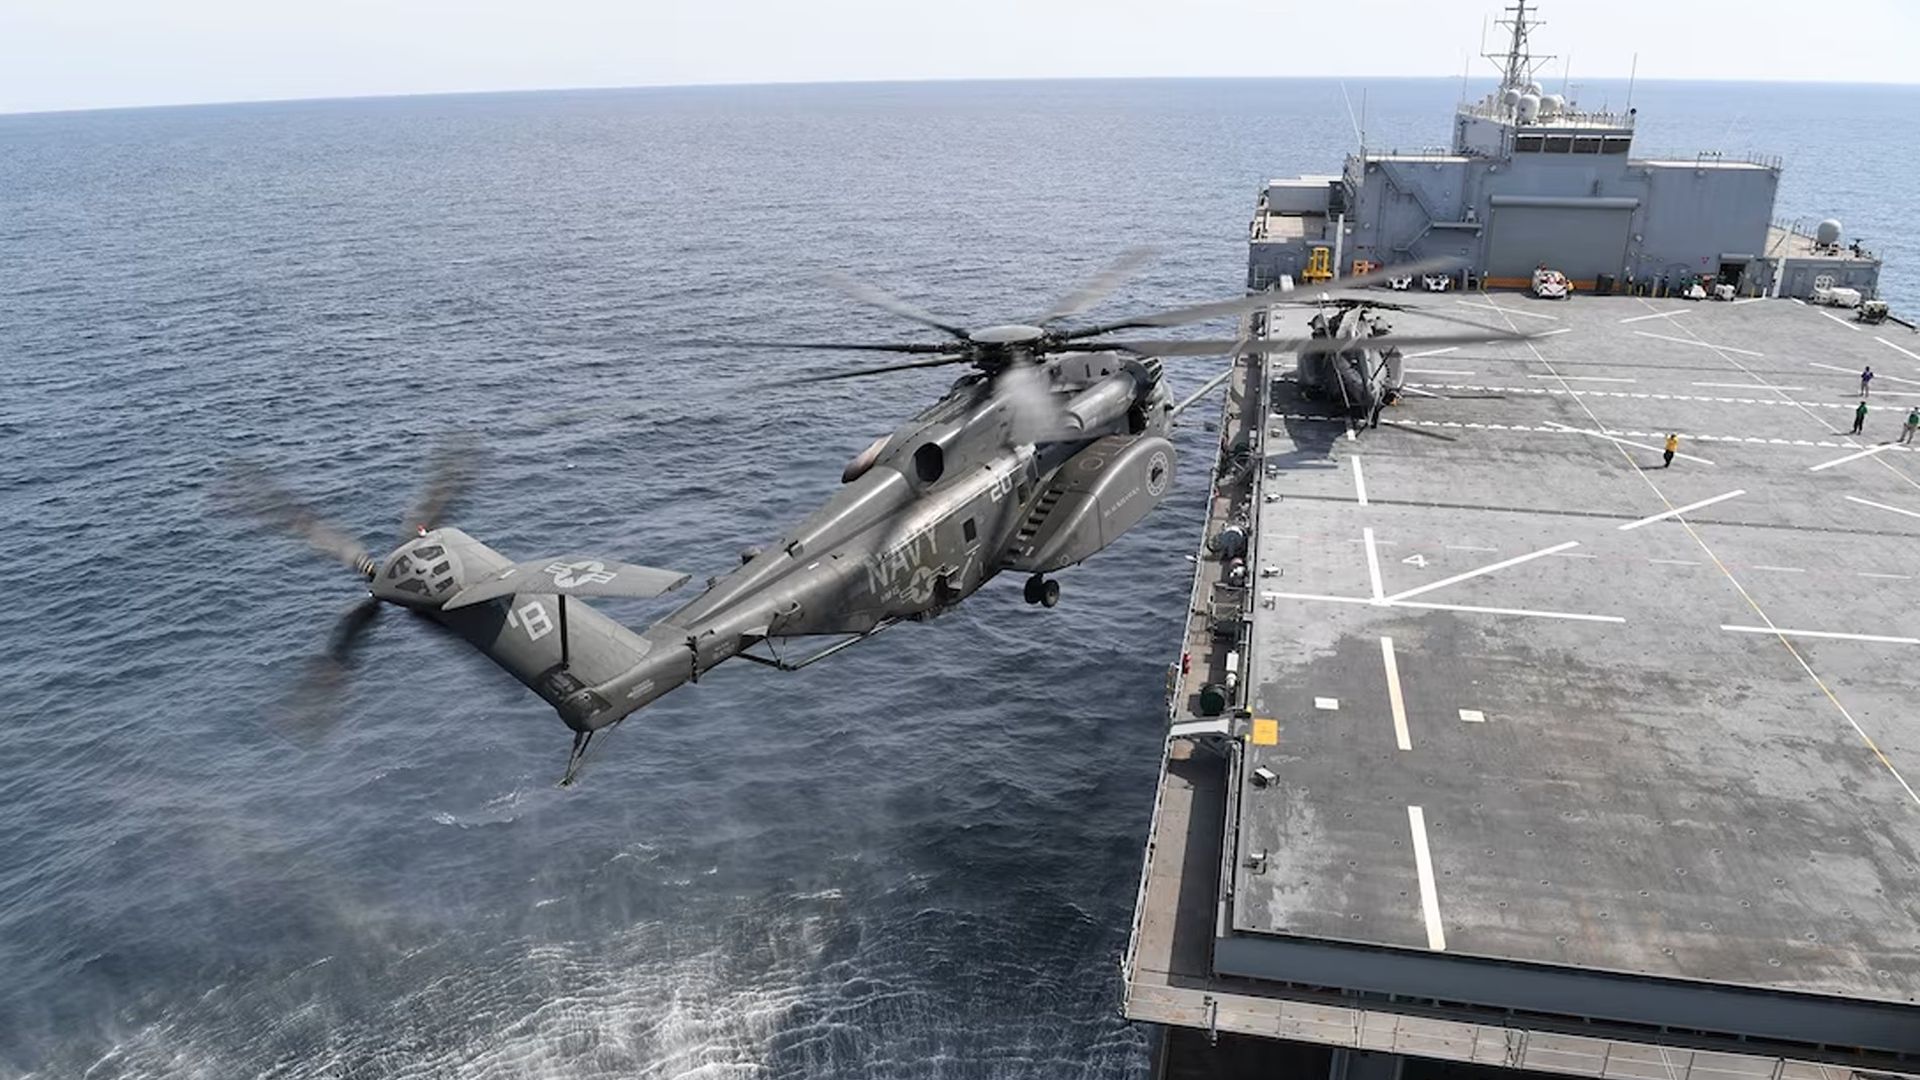  An MH-53E Sea Dragon, from Helicopter Mine Countermeasures Squadron (HM) 15, prepare to land on expeditionary mobile base platform ship USS Lewis B. Puller.